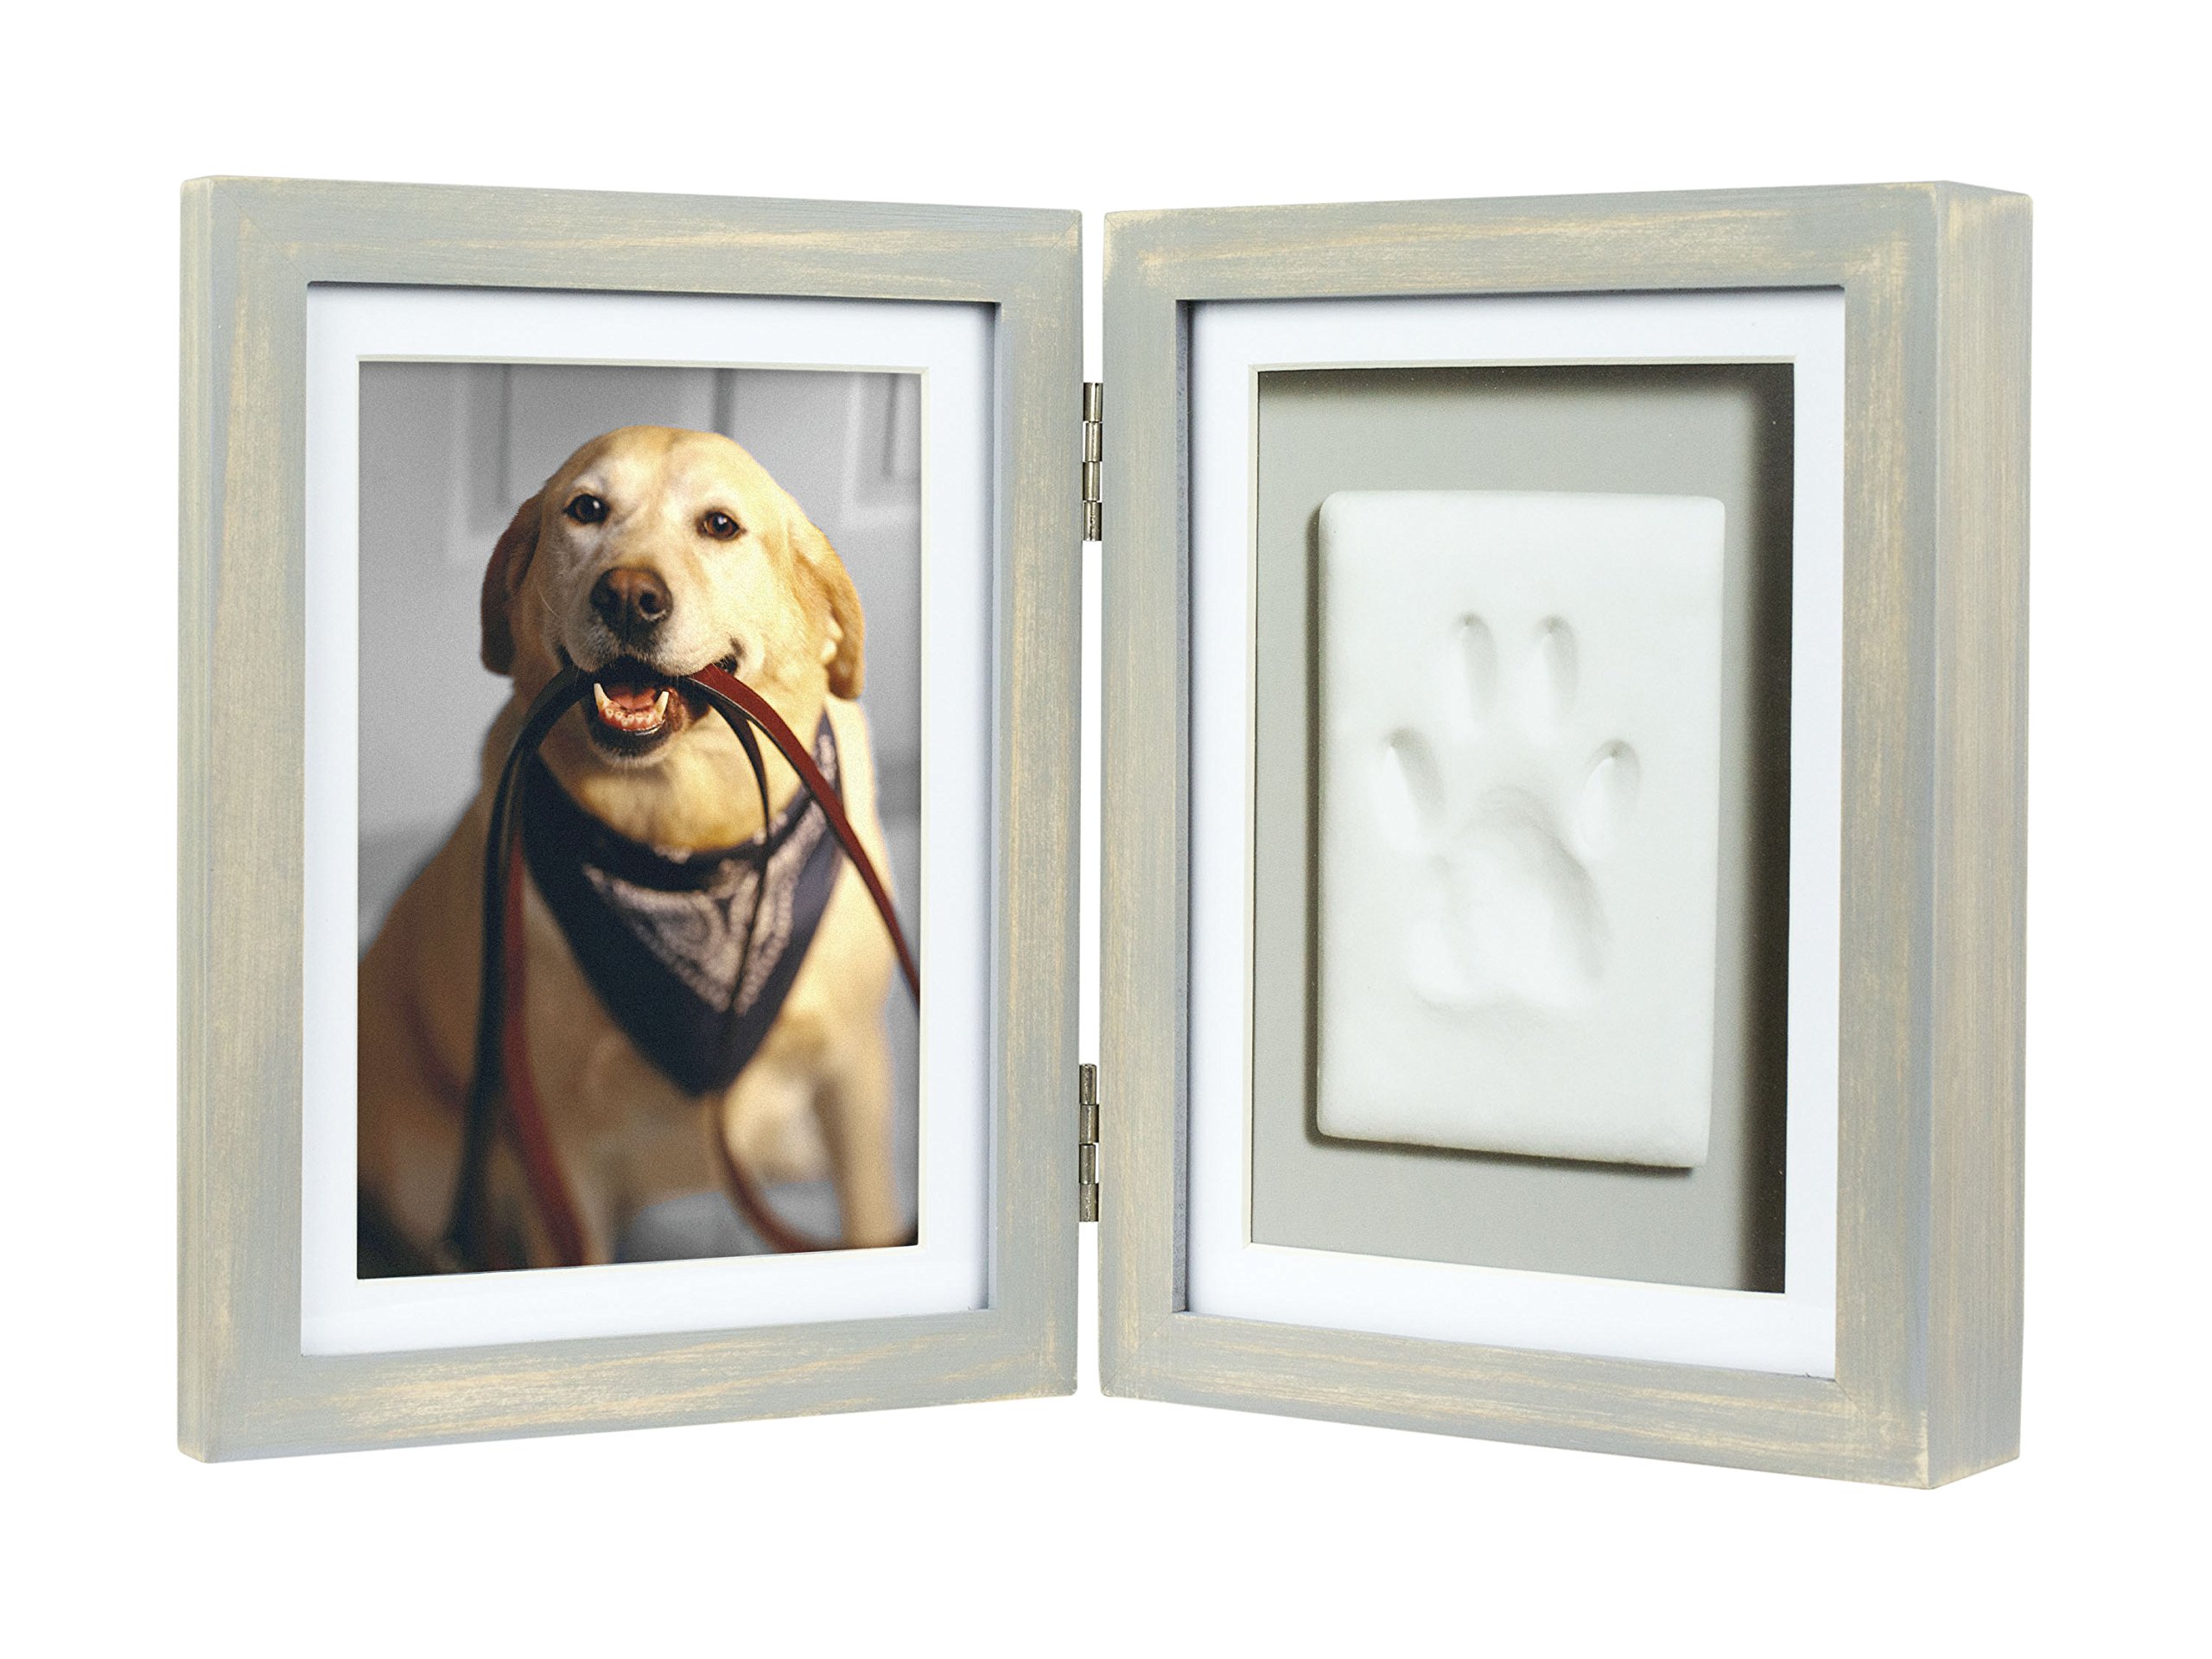 Pearhead Pawprint Pet Keepsake Photo Frame with Clay Imprint Kit, Dog or Cat Keepsake Frame, Tabletop Picture Frame, DIY Clay Paw Print, Distressed Grey